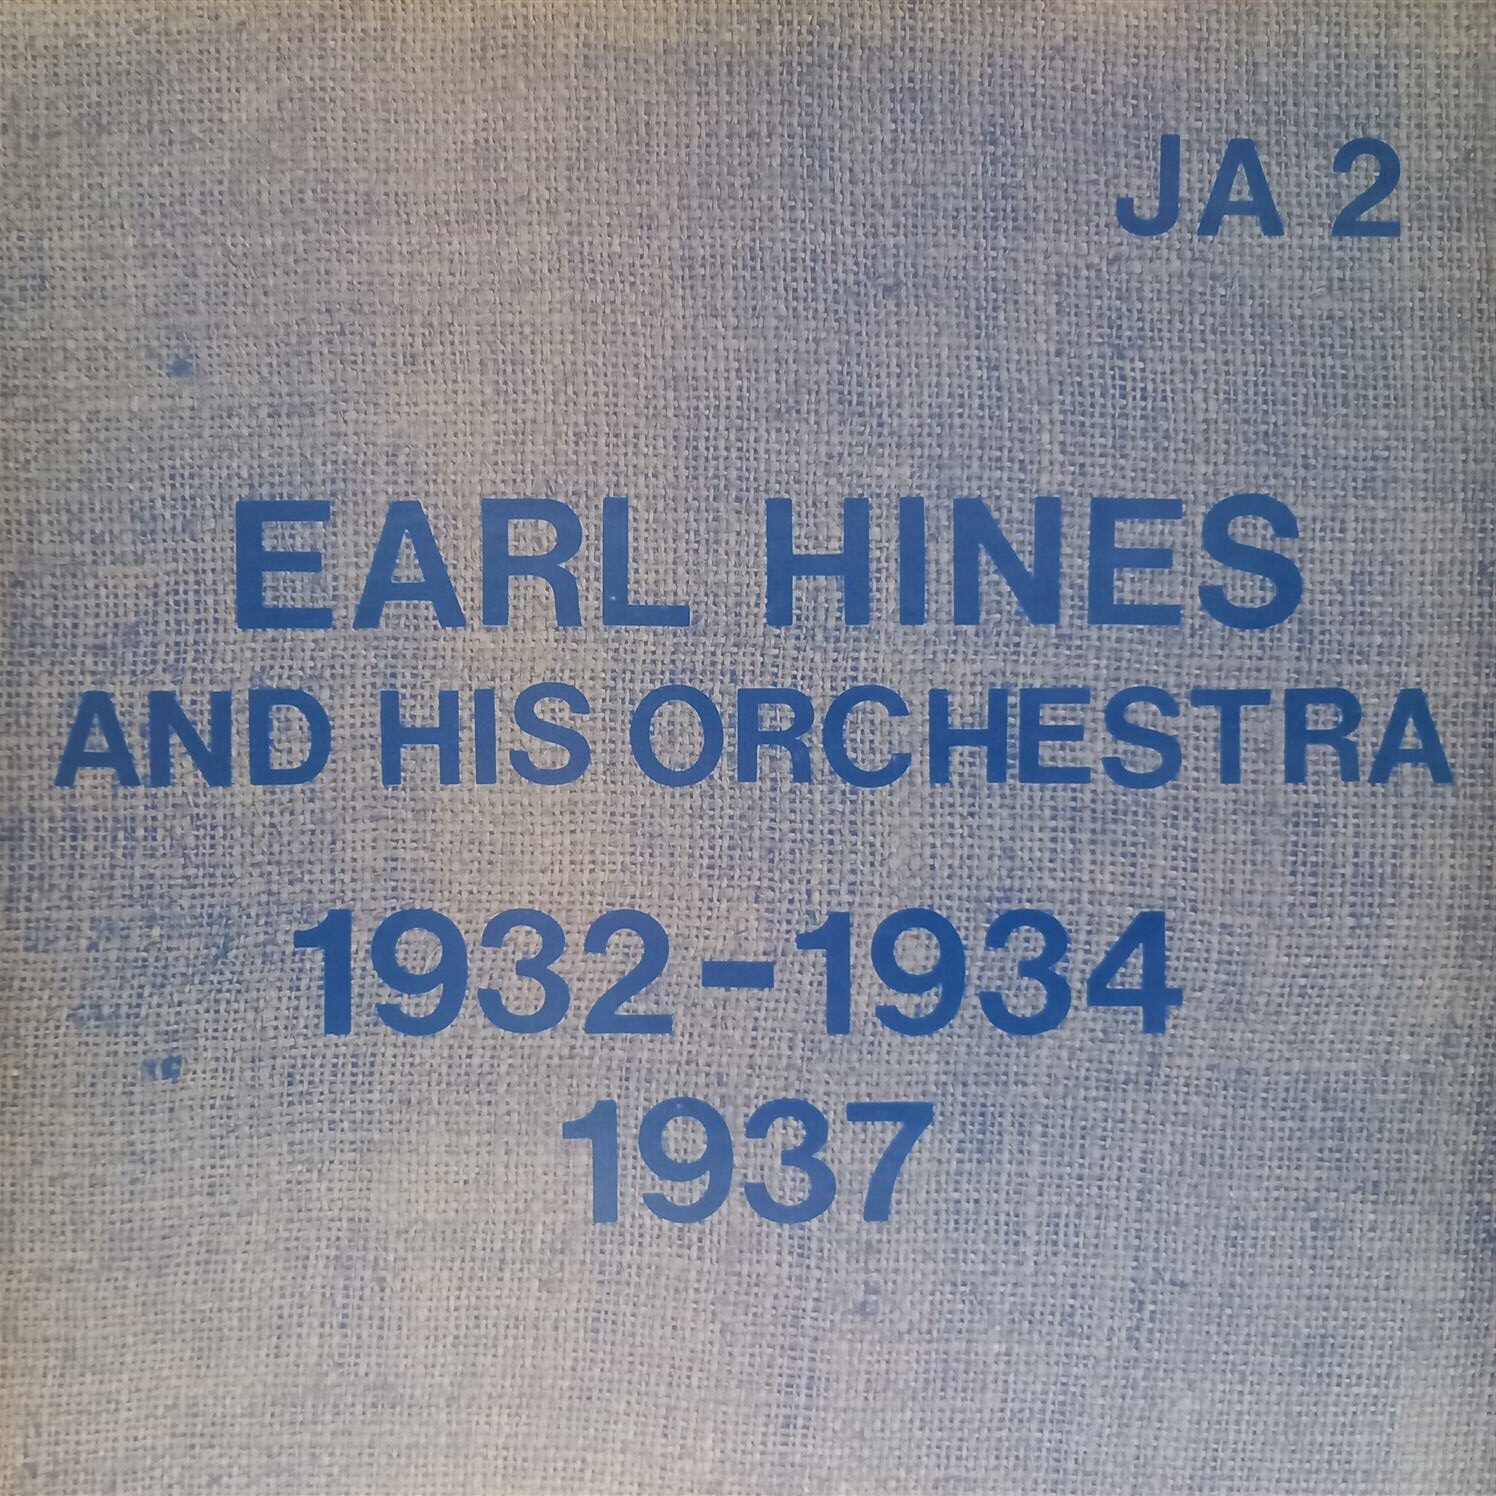 EARL HINES AND HIS ORCHESTRA – 1932-1934 1937 ON